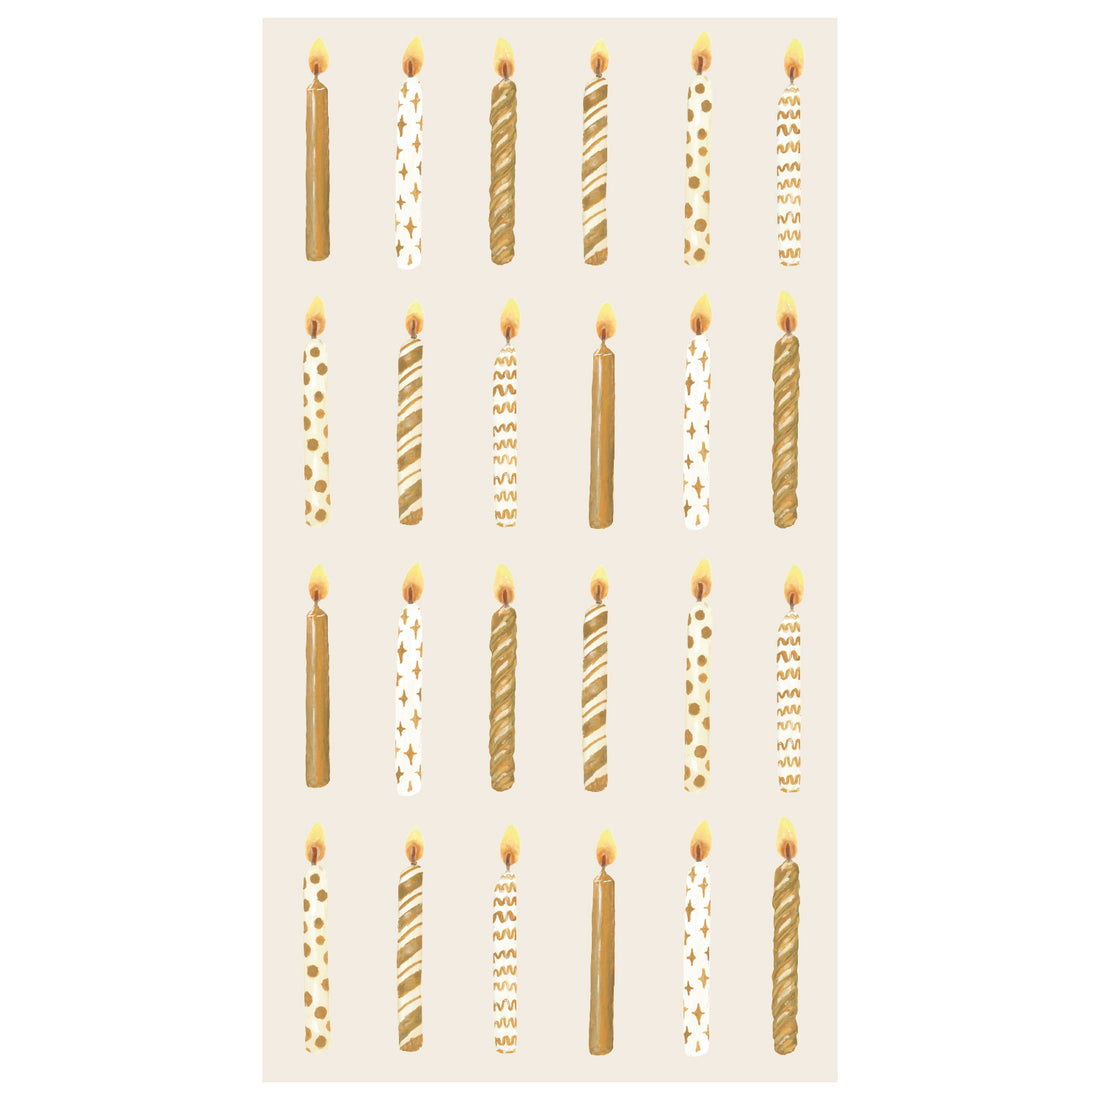 A rectangle, cream-colored guest napkin featuring twenty-four different gold and white lit birthday candles evenly spaced in four rows.